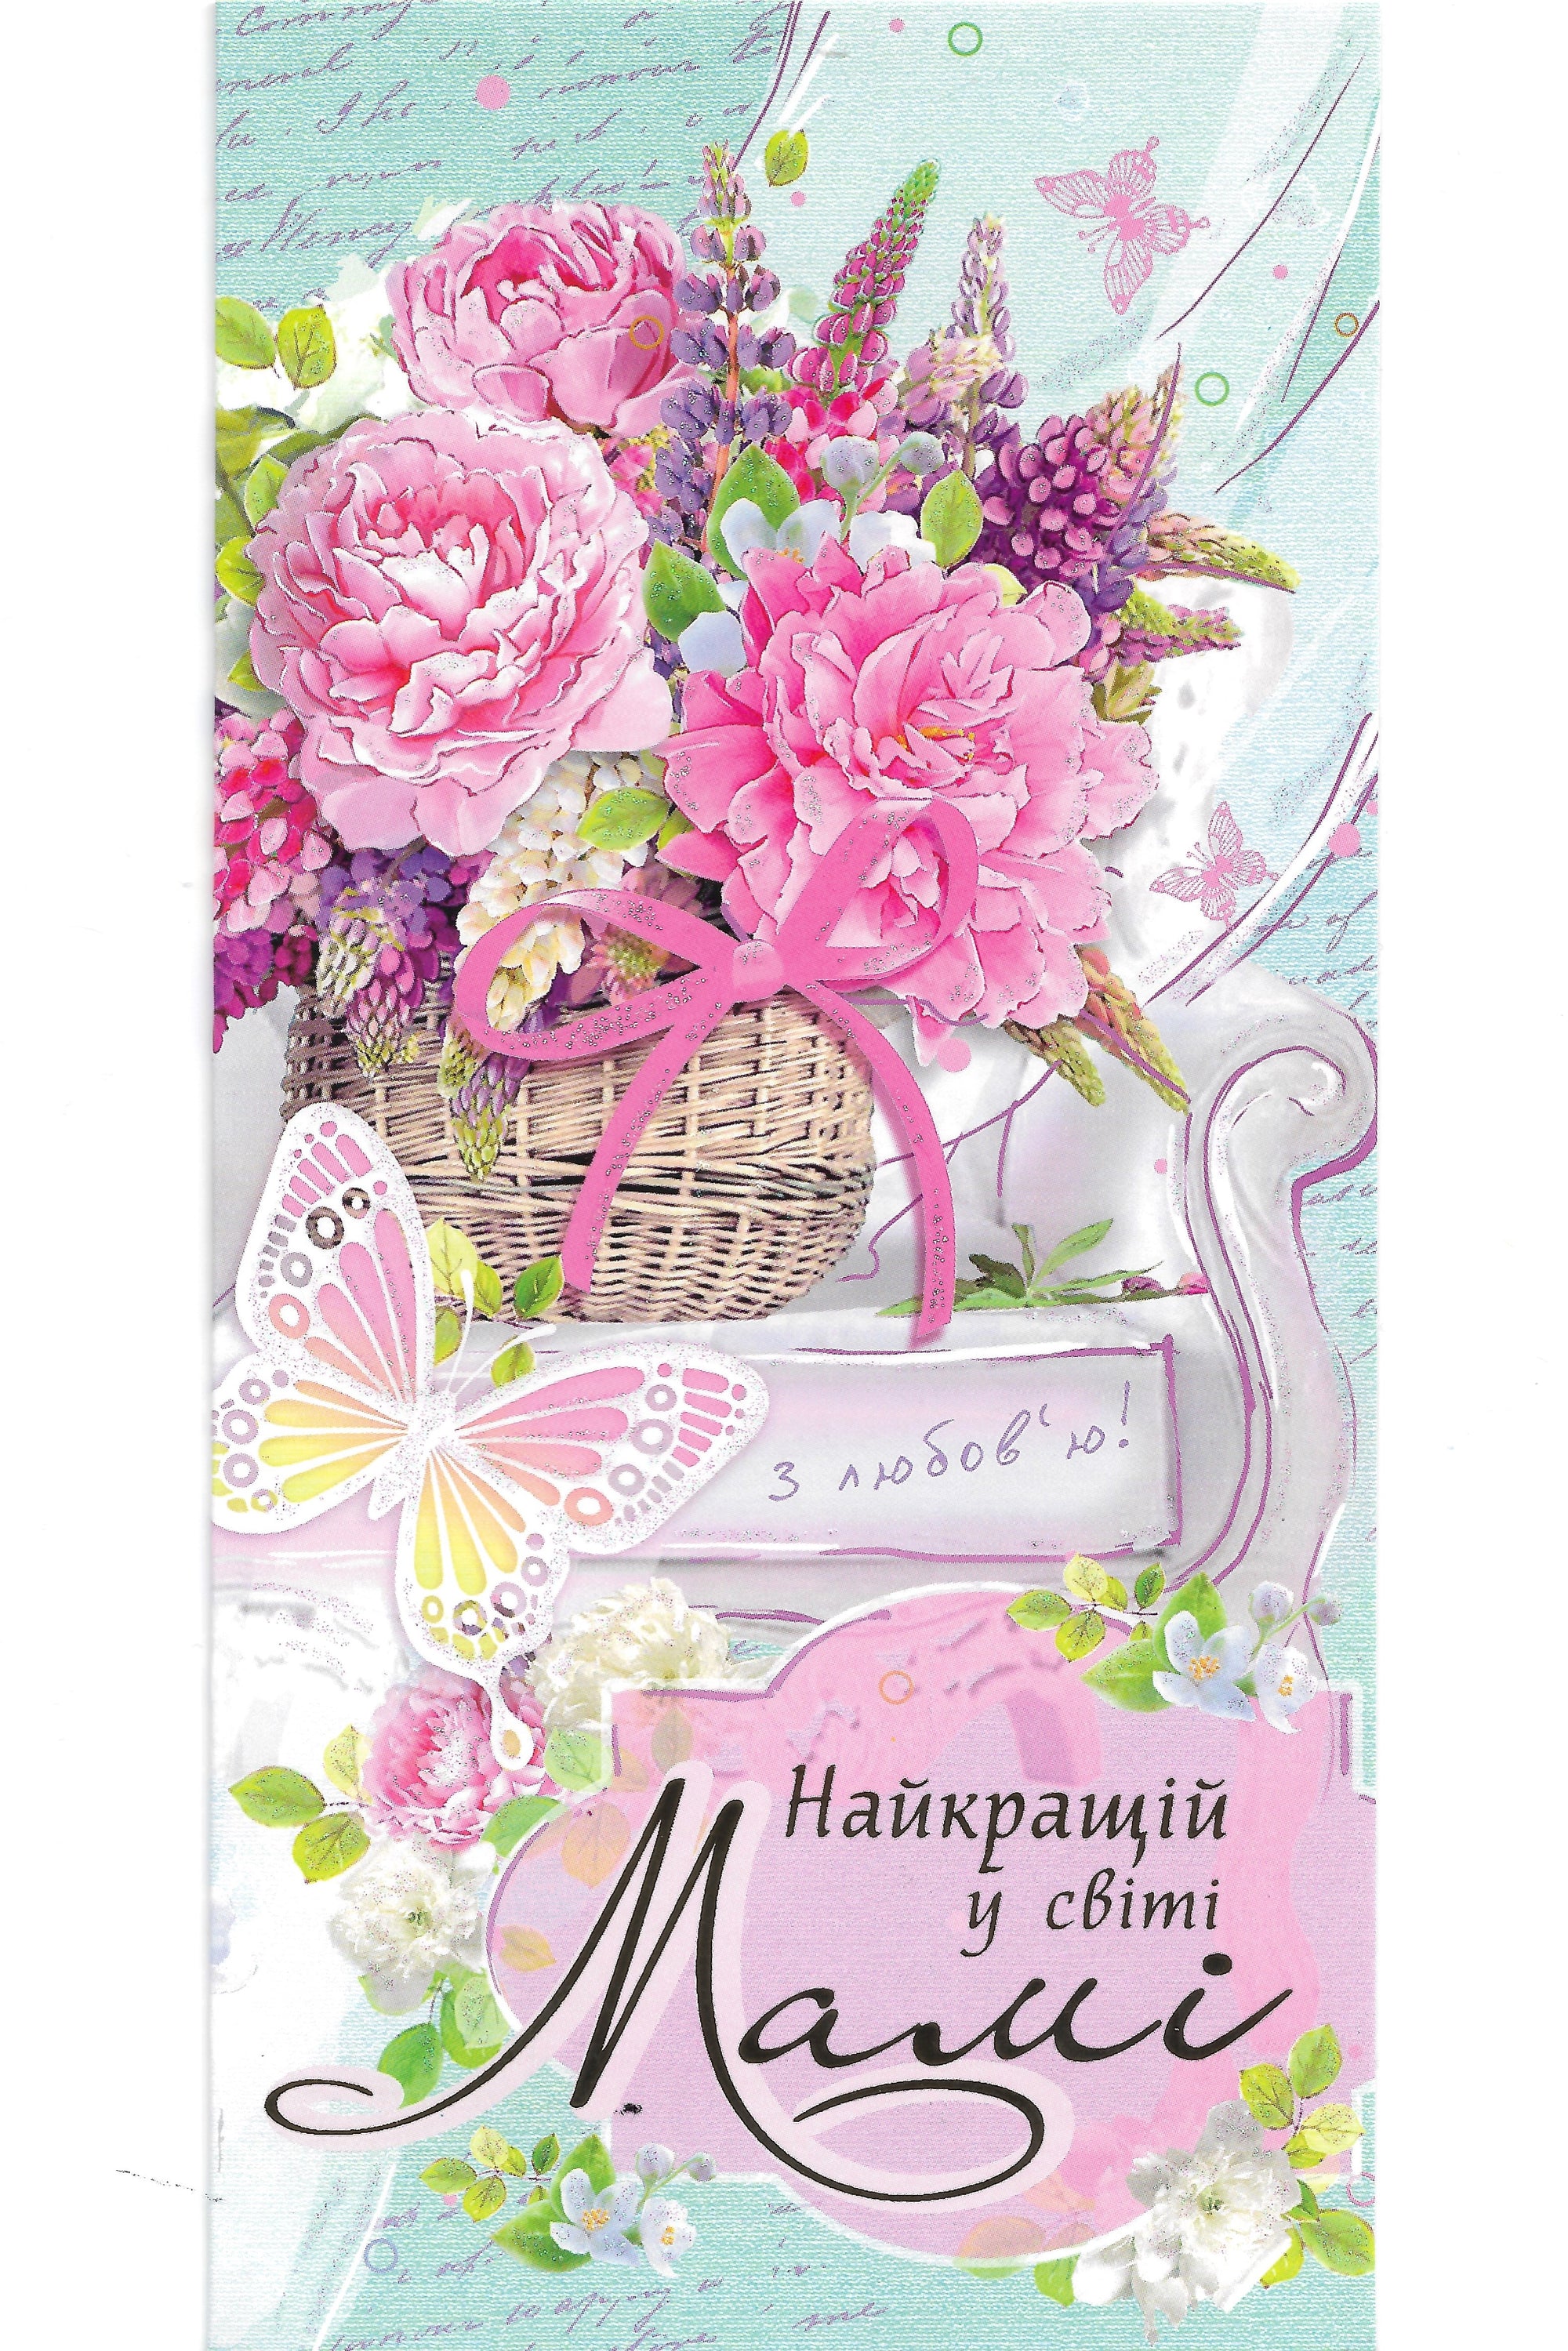 Greeting card "For the best Mom"